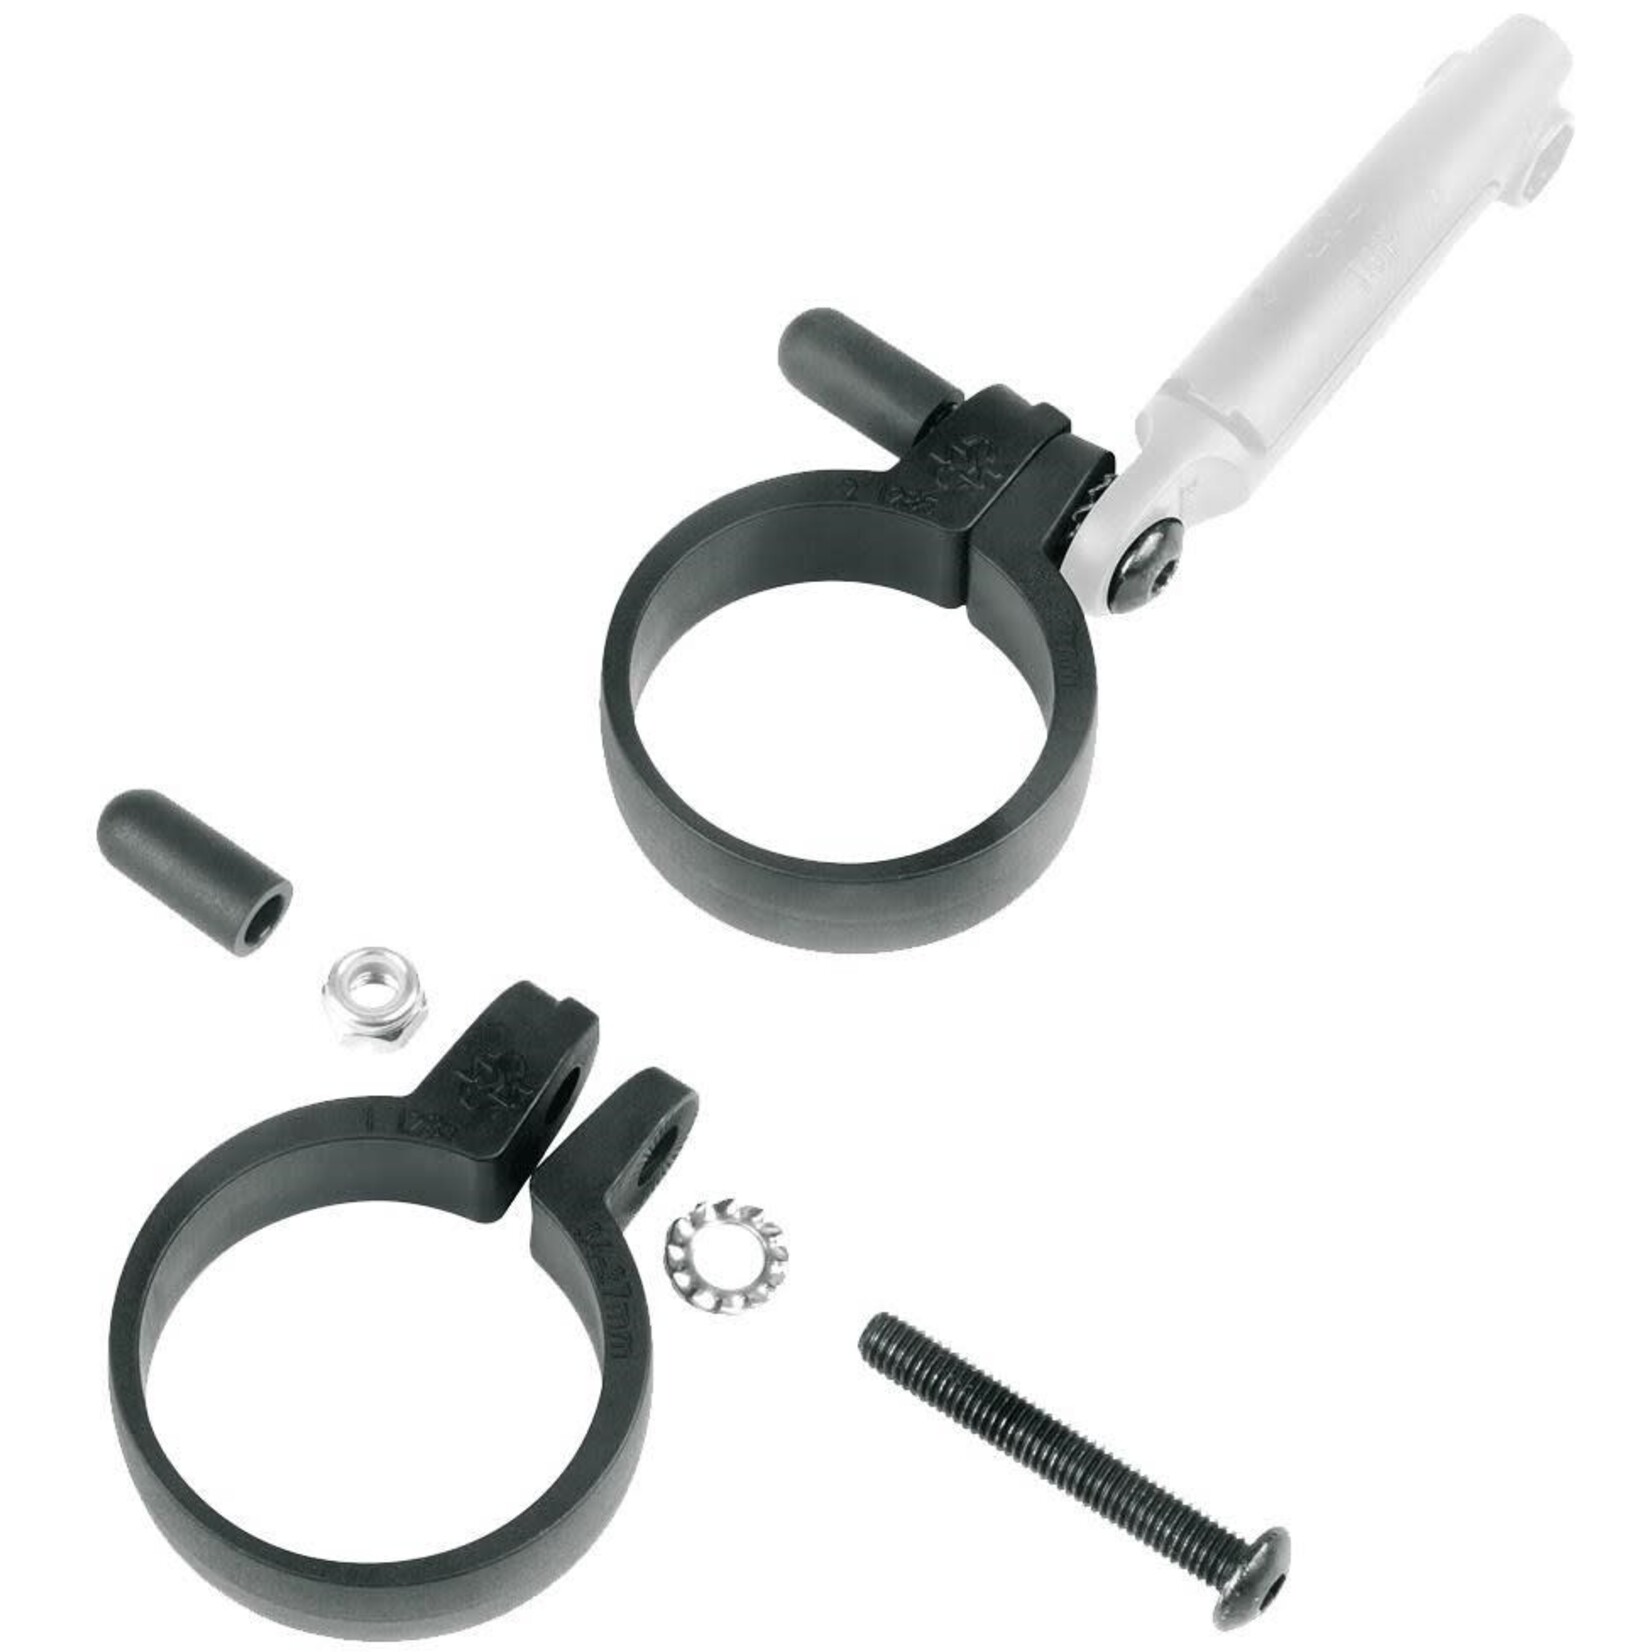 SKS SKS STAY MOUNTING CLAMPS (2 PCS): 40-43MM